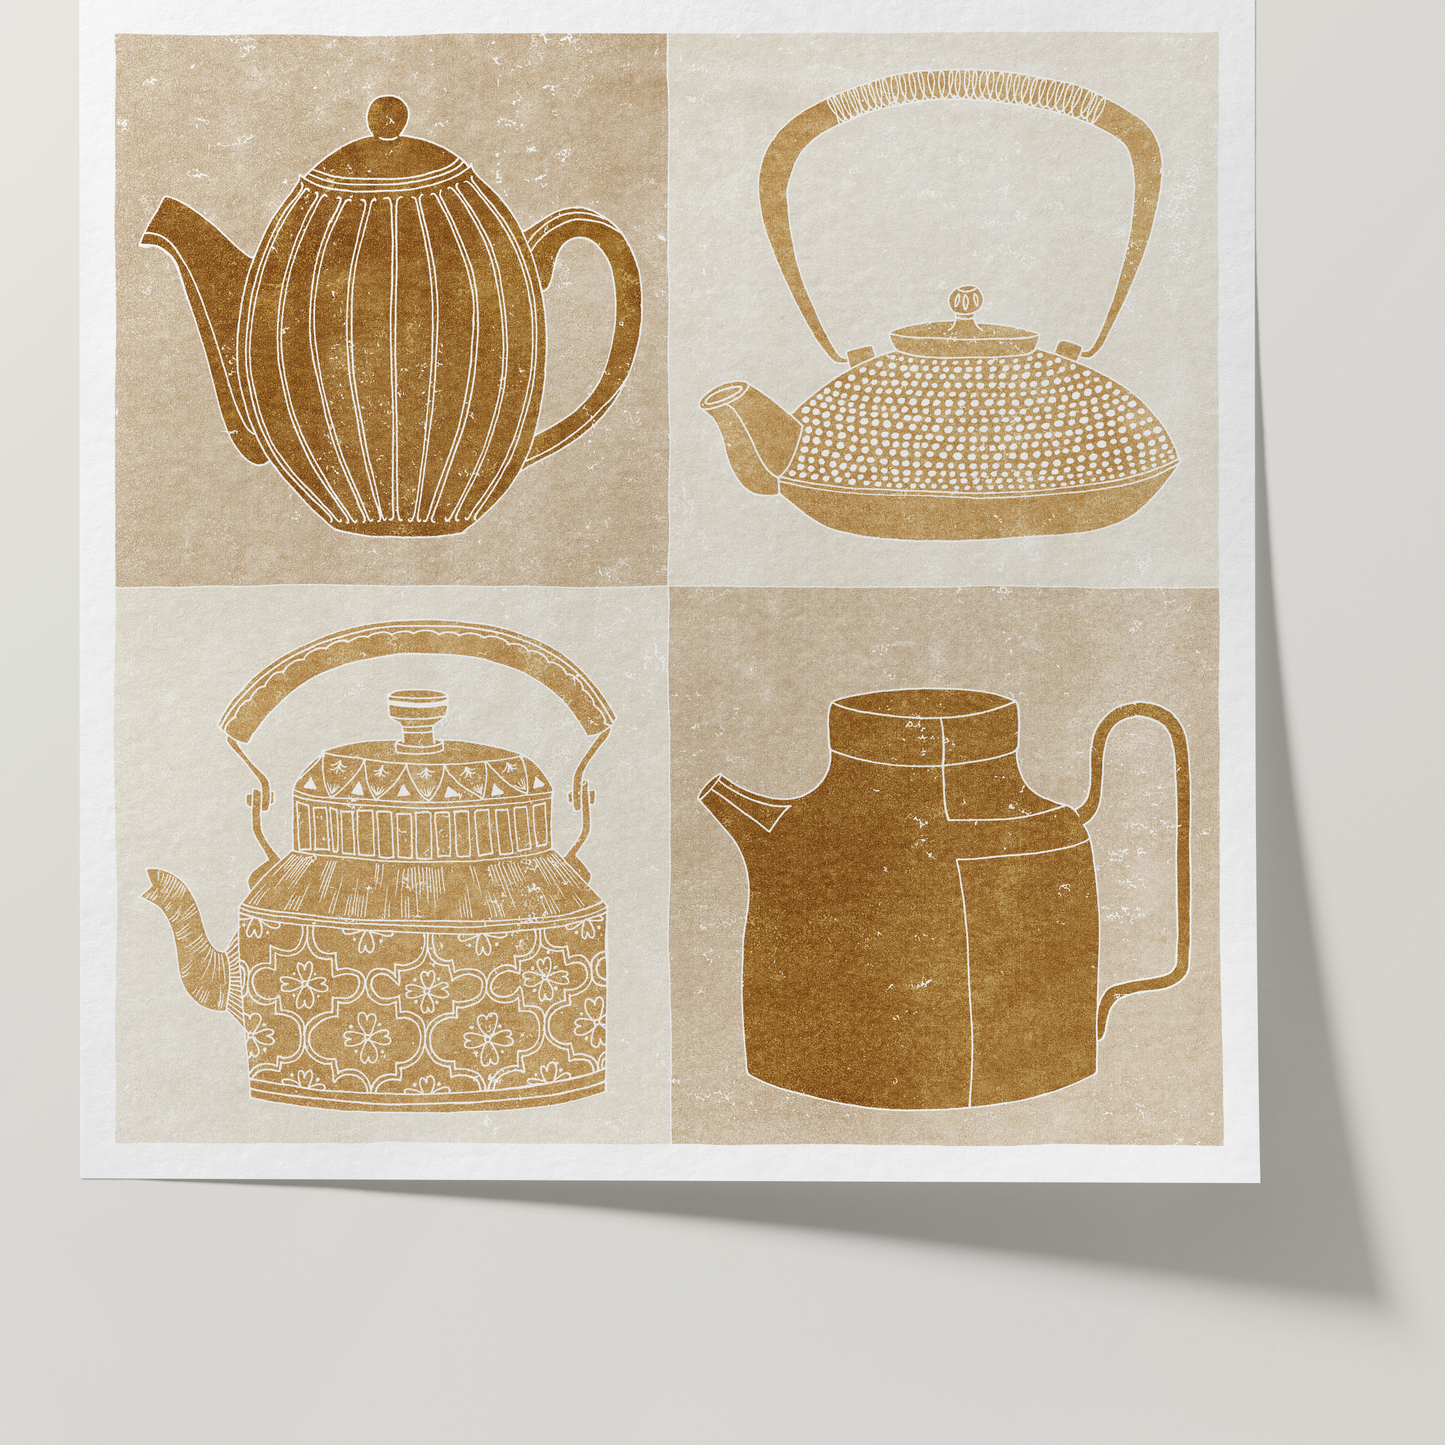 Home Decor Print - Giclee Print - Nature-inspired Prints - Teapots - Framed - Linocut Effect Illustration - Ochre = Hahnemühle German Etching Paper - Front